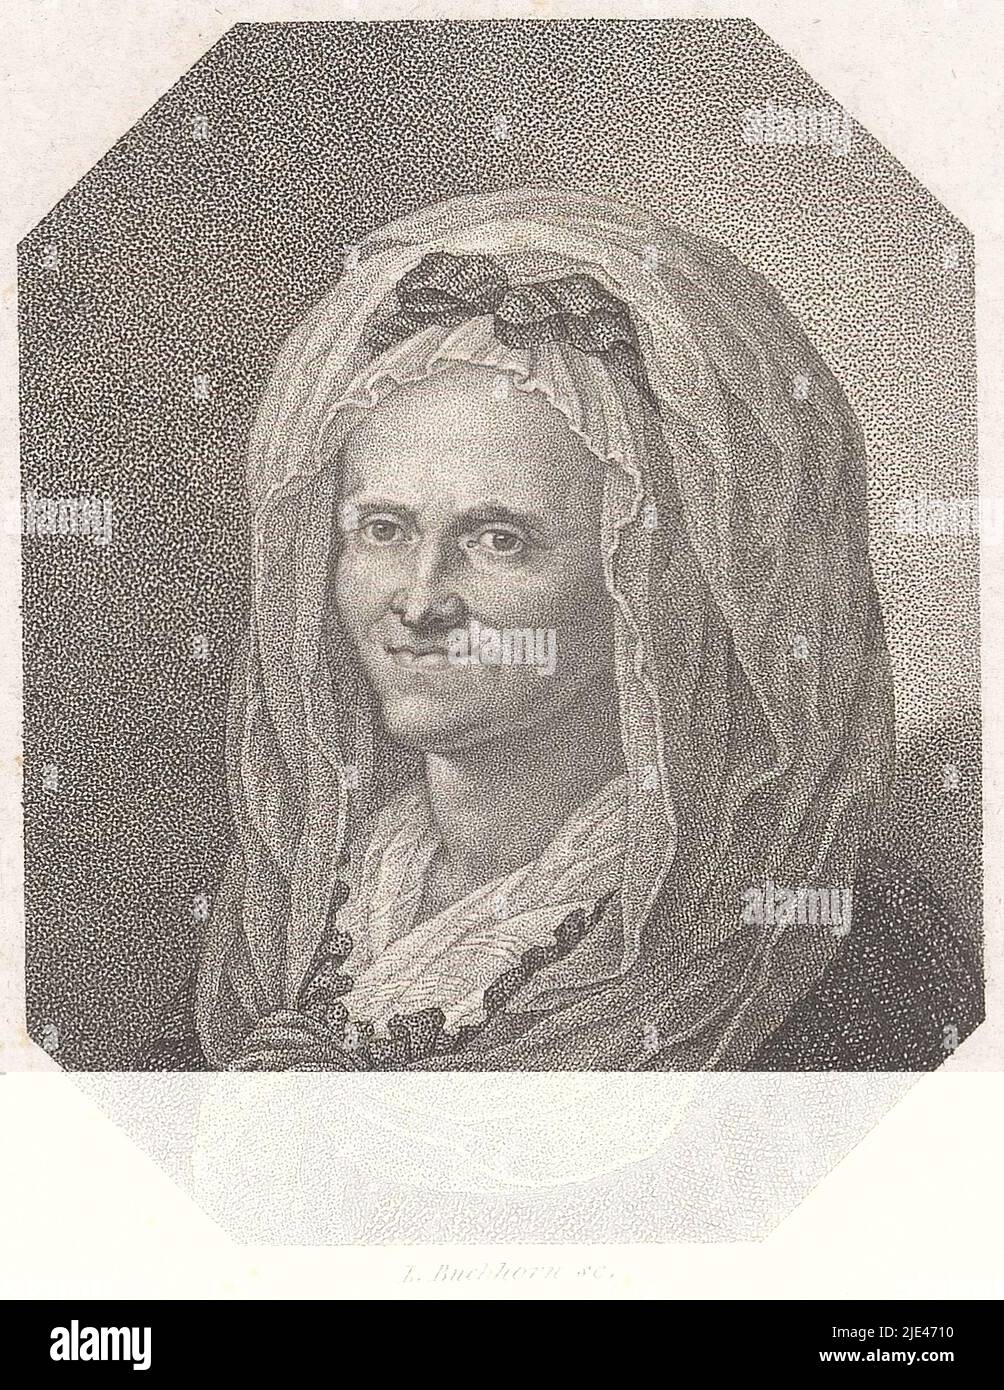 Portrait of Anna Luise Karsch, Ludwig Buchhorn, 1818 - 1832, print maker: Ludwig Buchhorn, (mentioned on object), publisher: gebroeders Schumann, (mentioned on object), print maker: Berlin, publisher: Zwickau, 1818 - 1832, paper, h 180 mm - w 121 mm Stock Photo